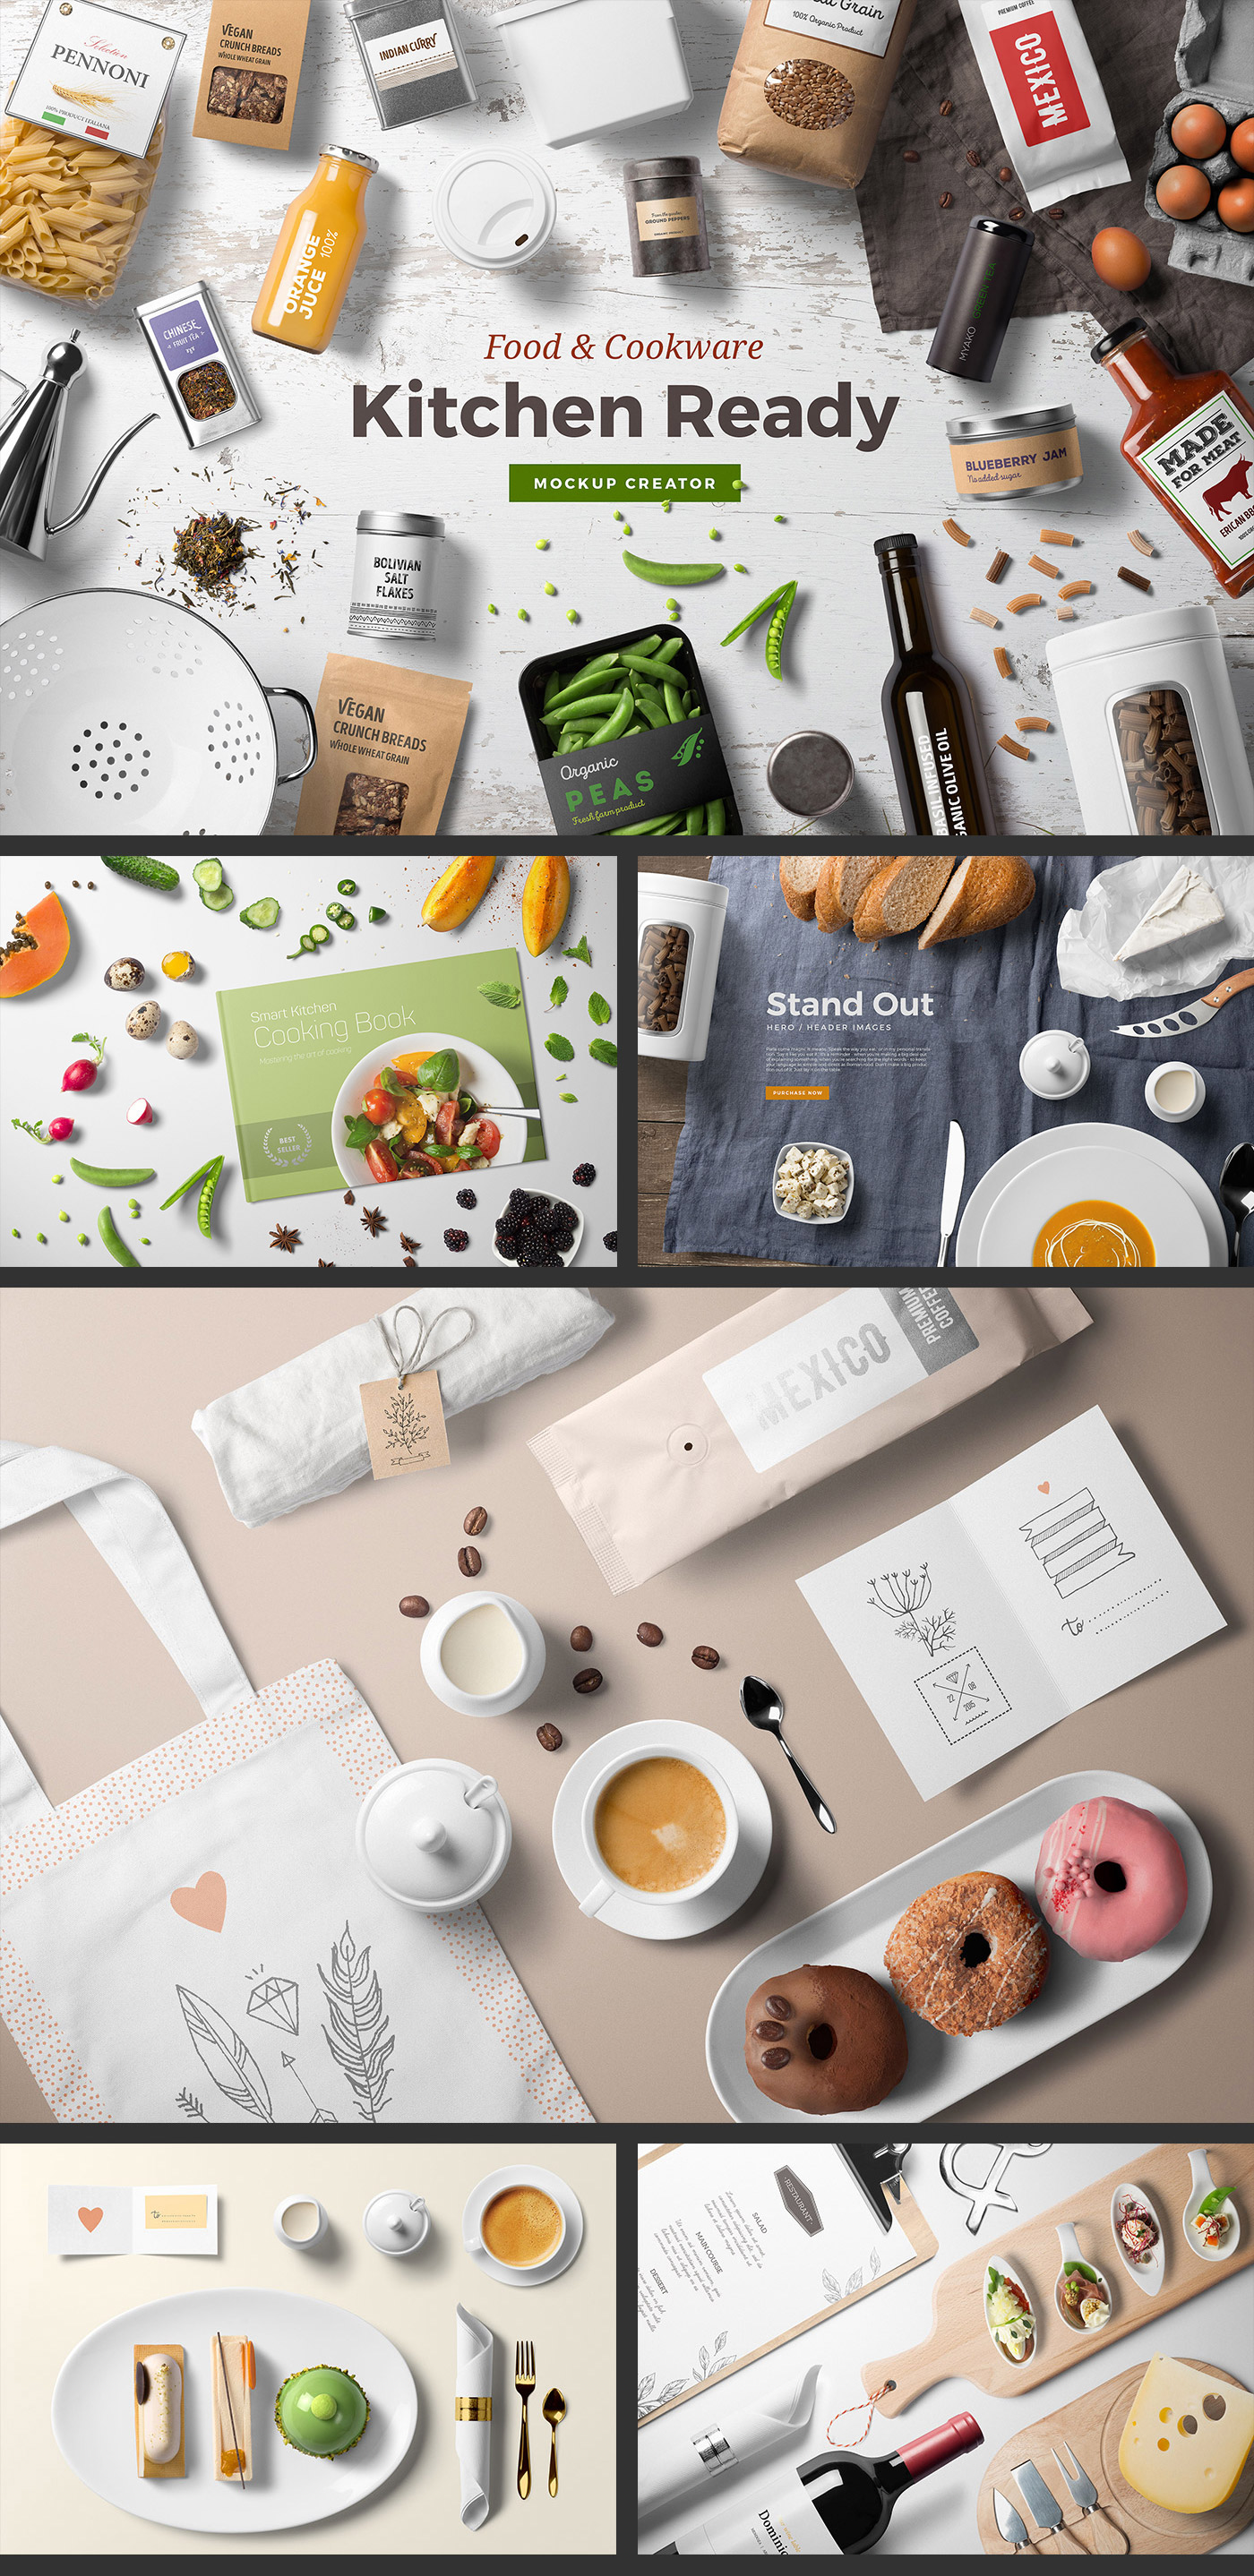 Download Kitchen Ready Mockup Creator by Mockup Cloud on Dribbble